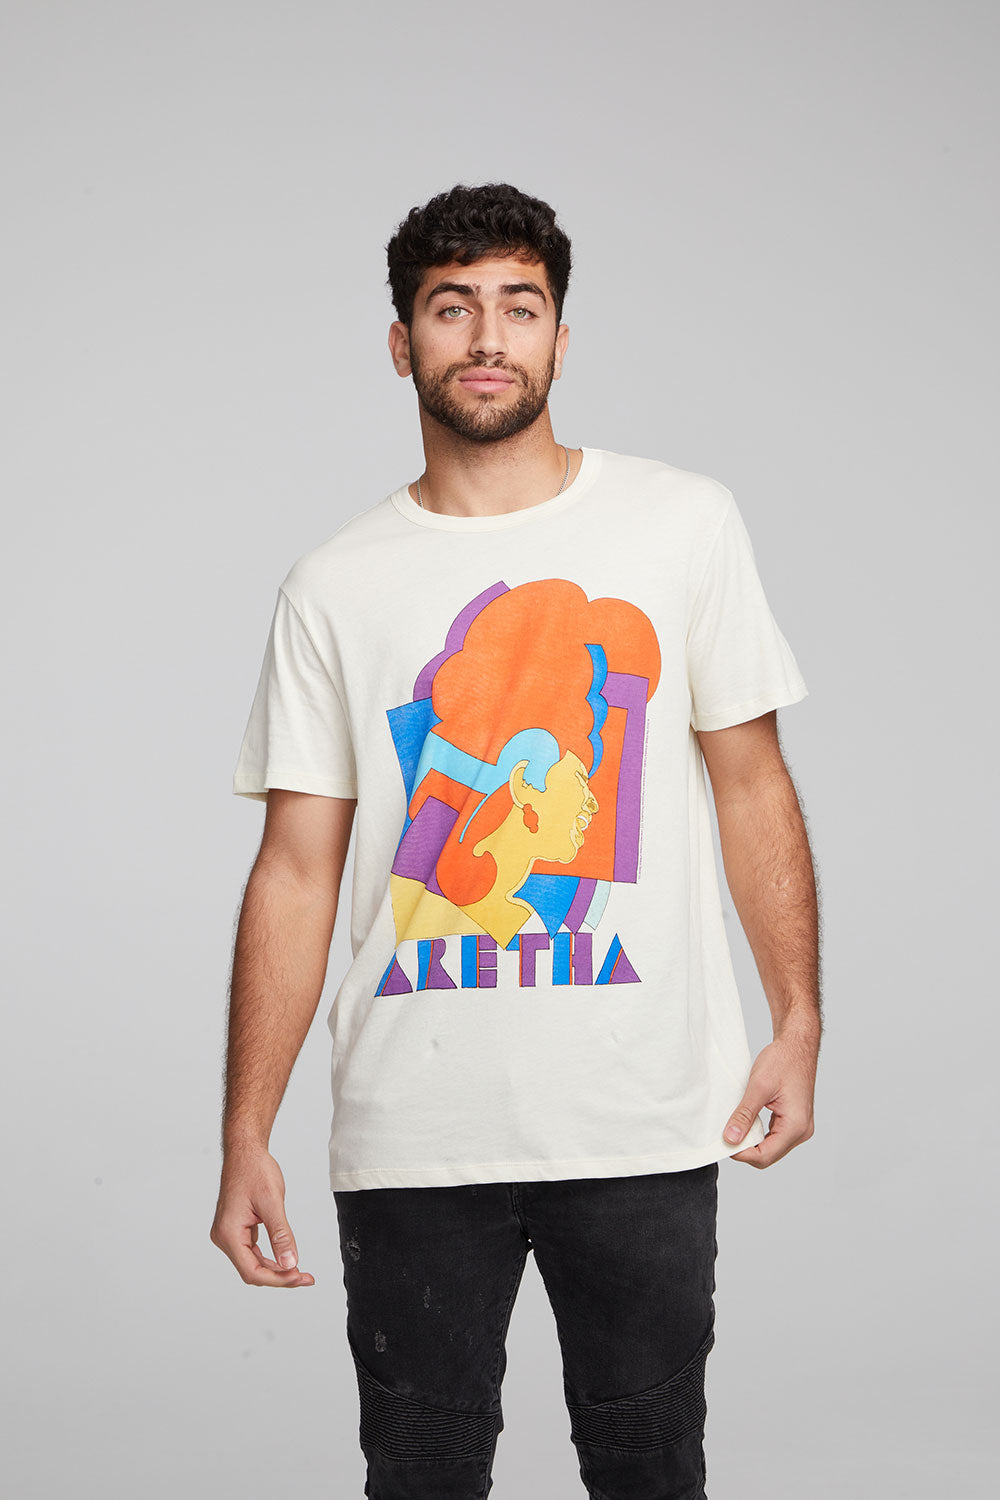 Chaser Aretha Franklin Retro Poster Tee